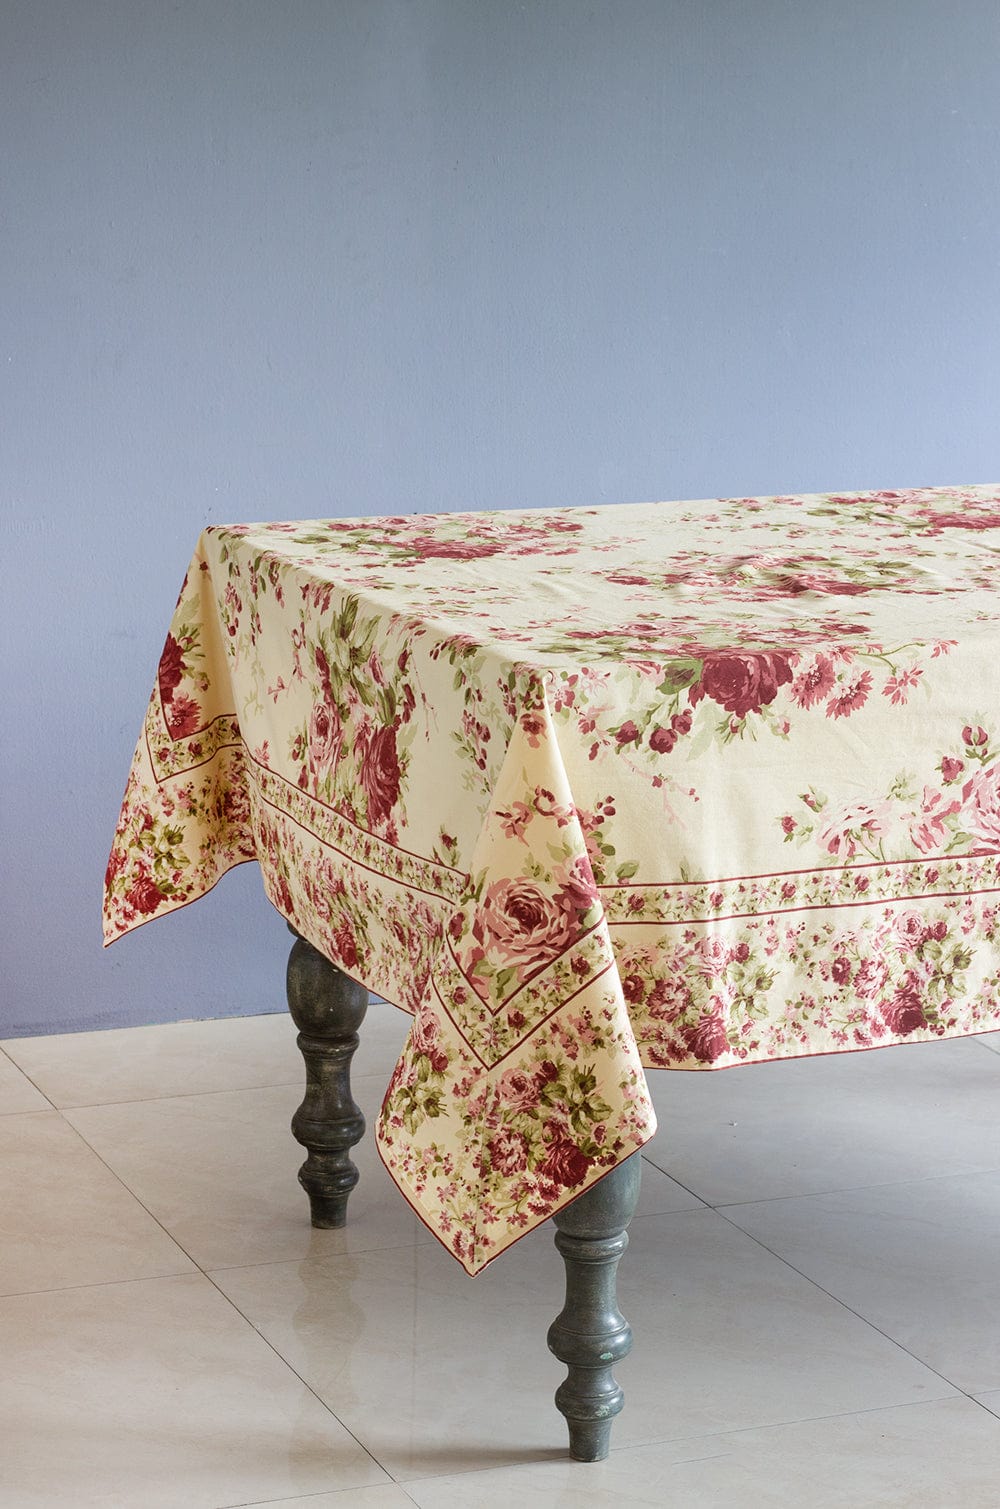 Cottage Antique Breakfast Cloth -4 Seater